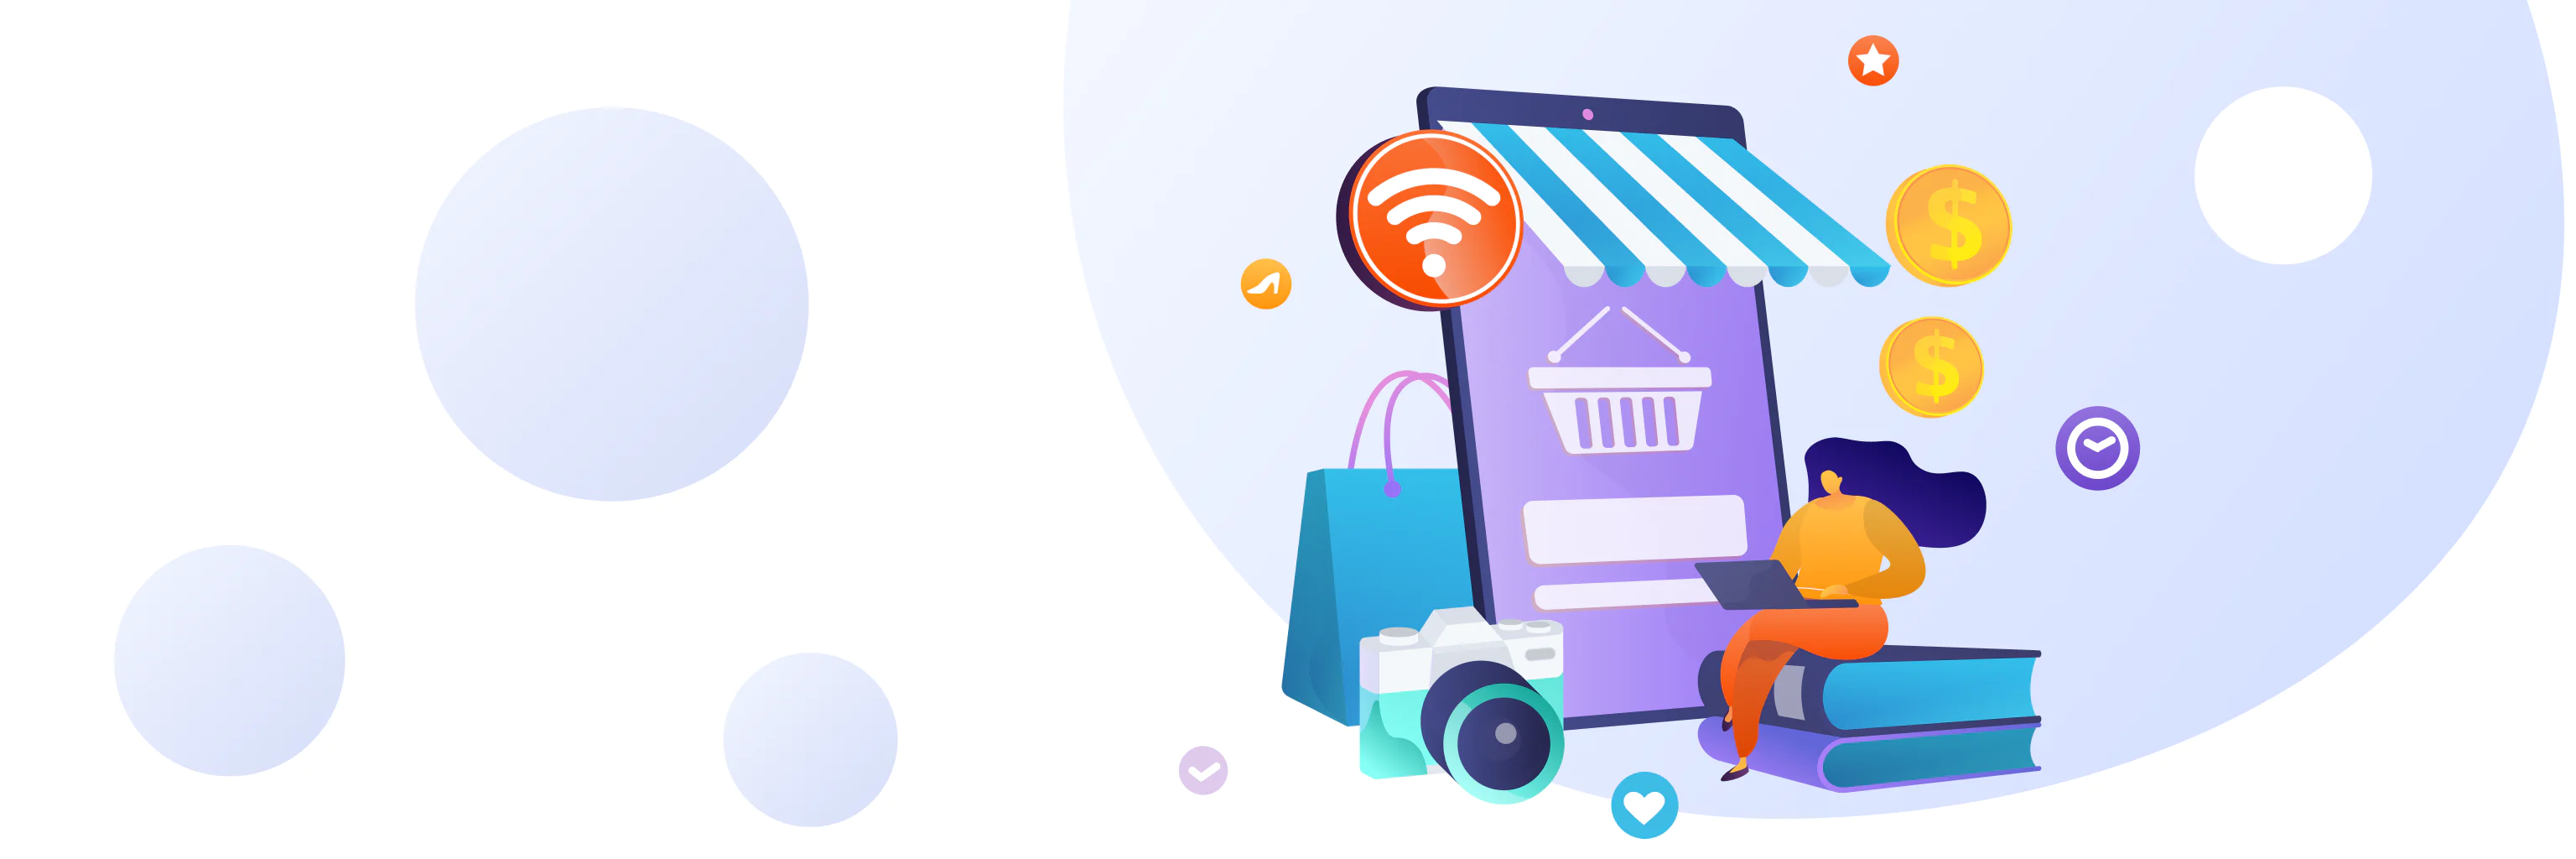 Ecommerce Website Development Tips: How to Make Your Shop Attractive